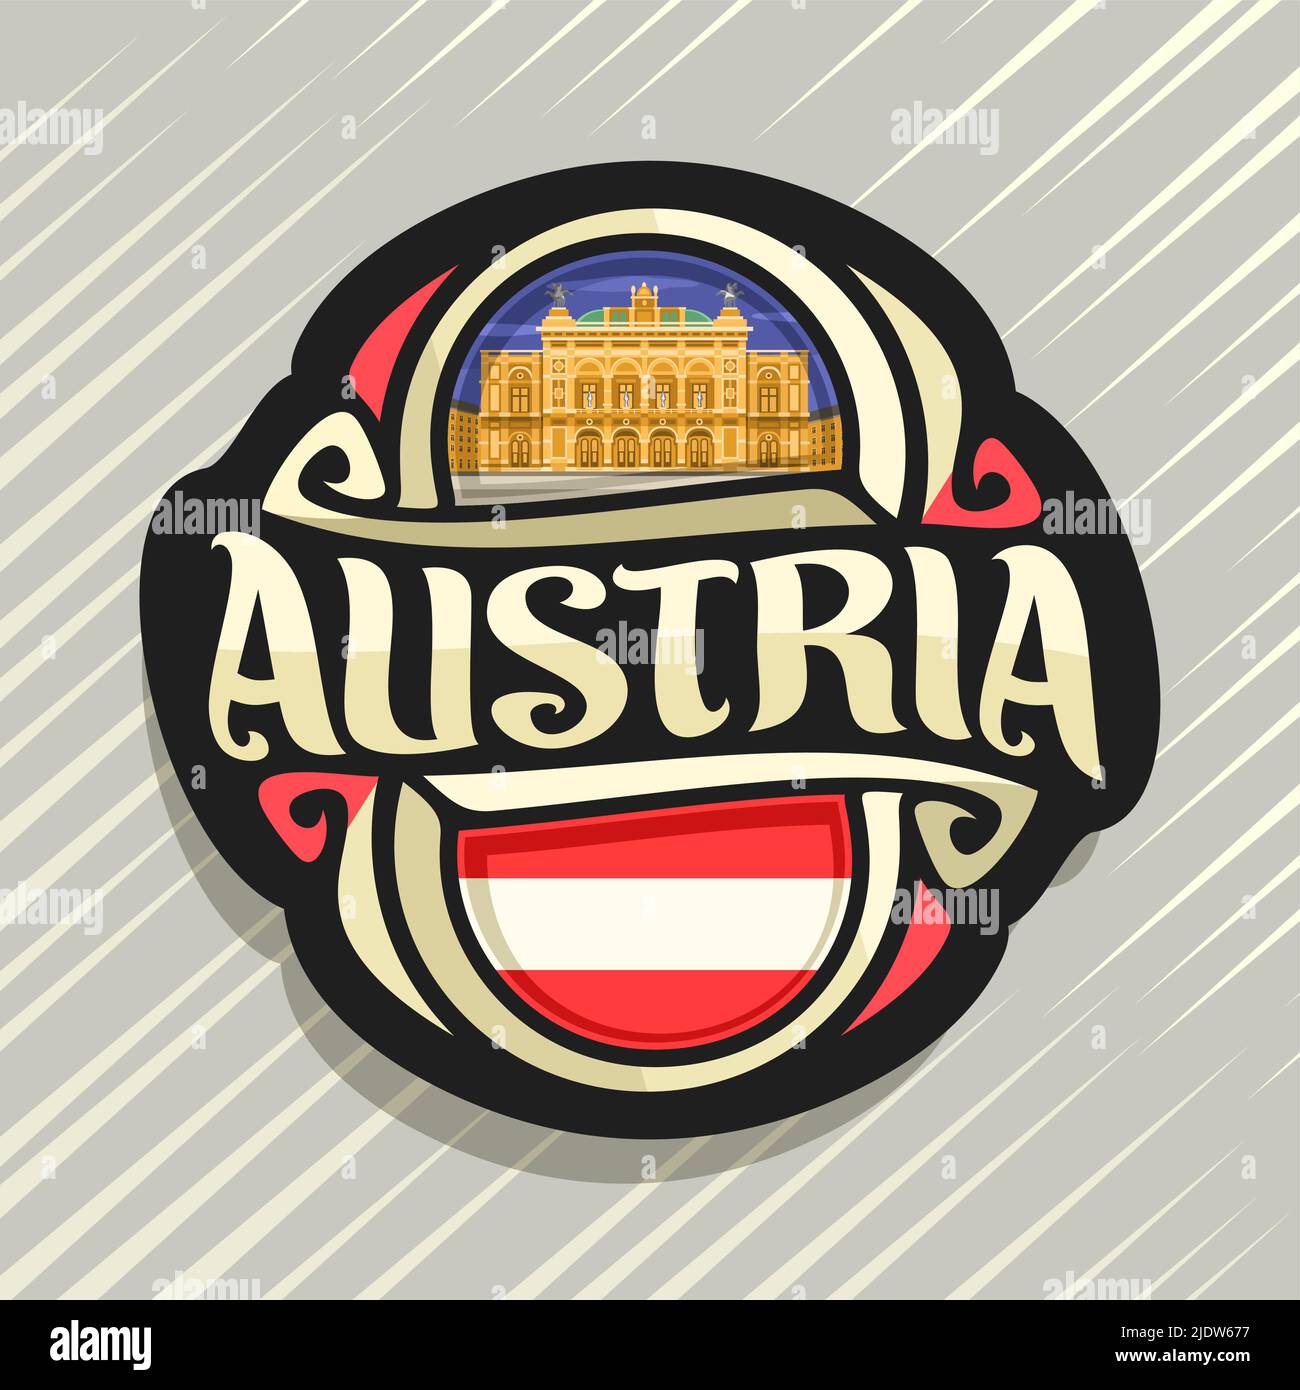 Vector logo for Austria country, fridge magnet with austrian state flag, original brush typeface for word austria and national austrian symbol - Vienn Stock Vector